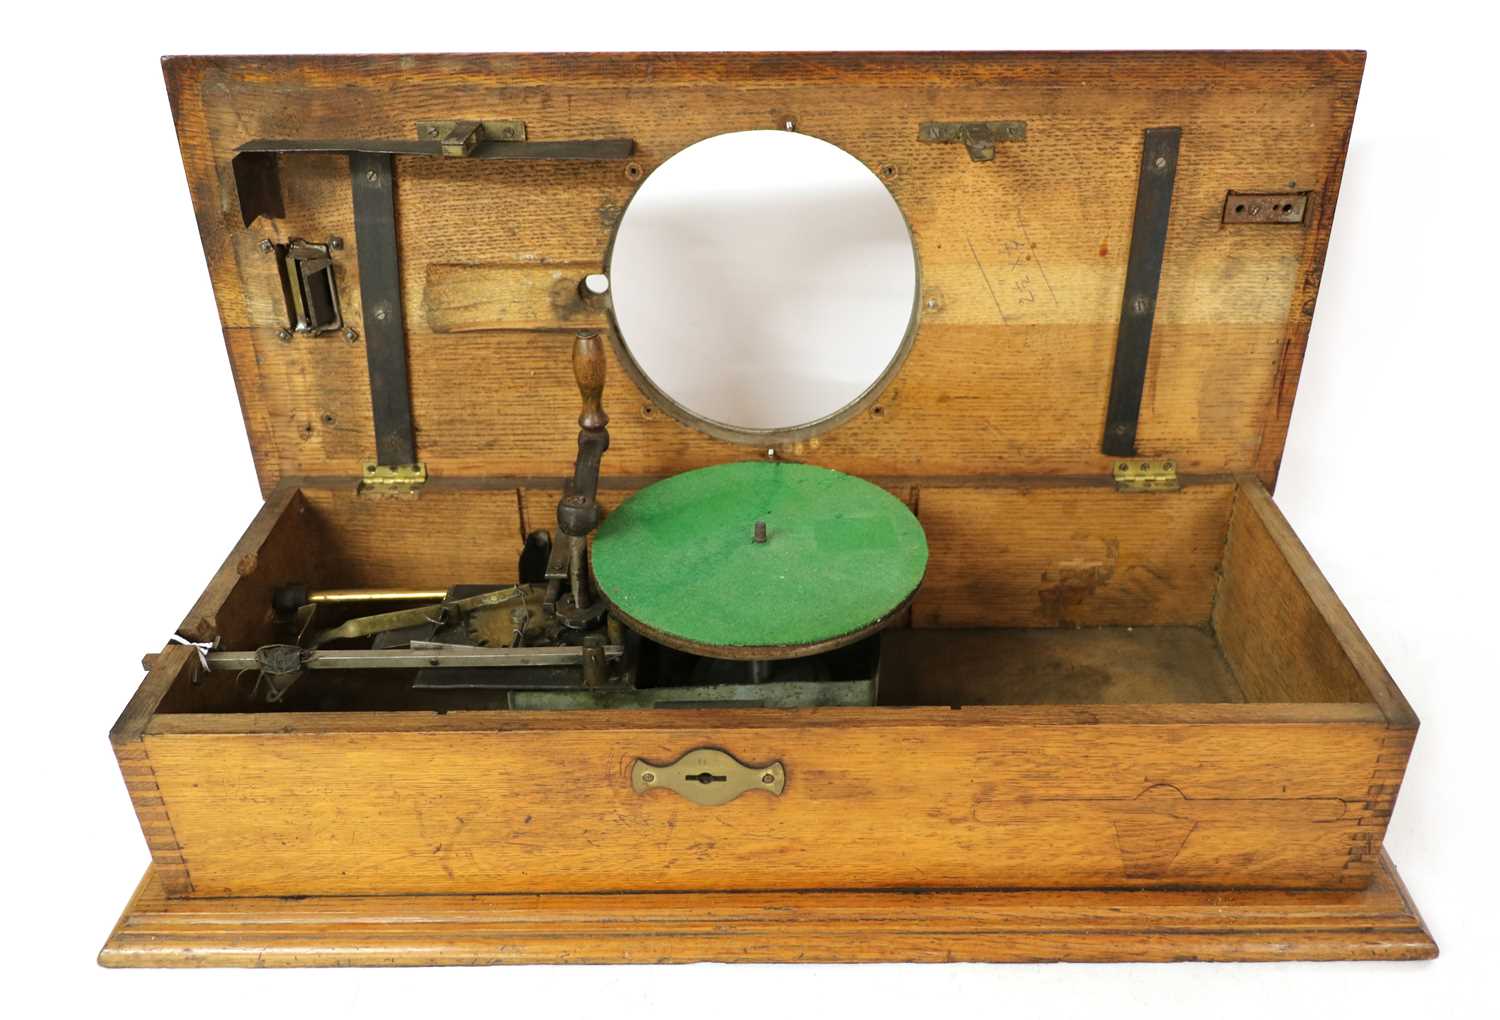 G&T/Berliner 1d Operated Gramophone - Image 2 of 3